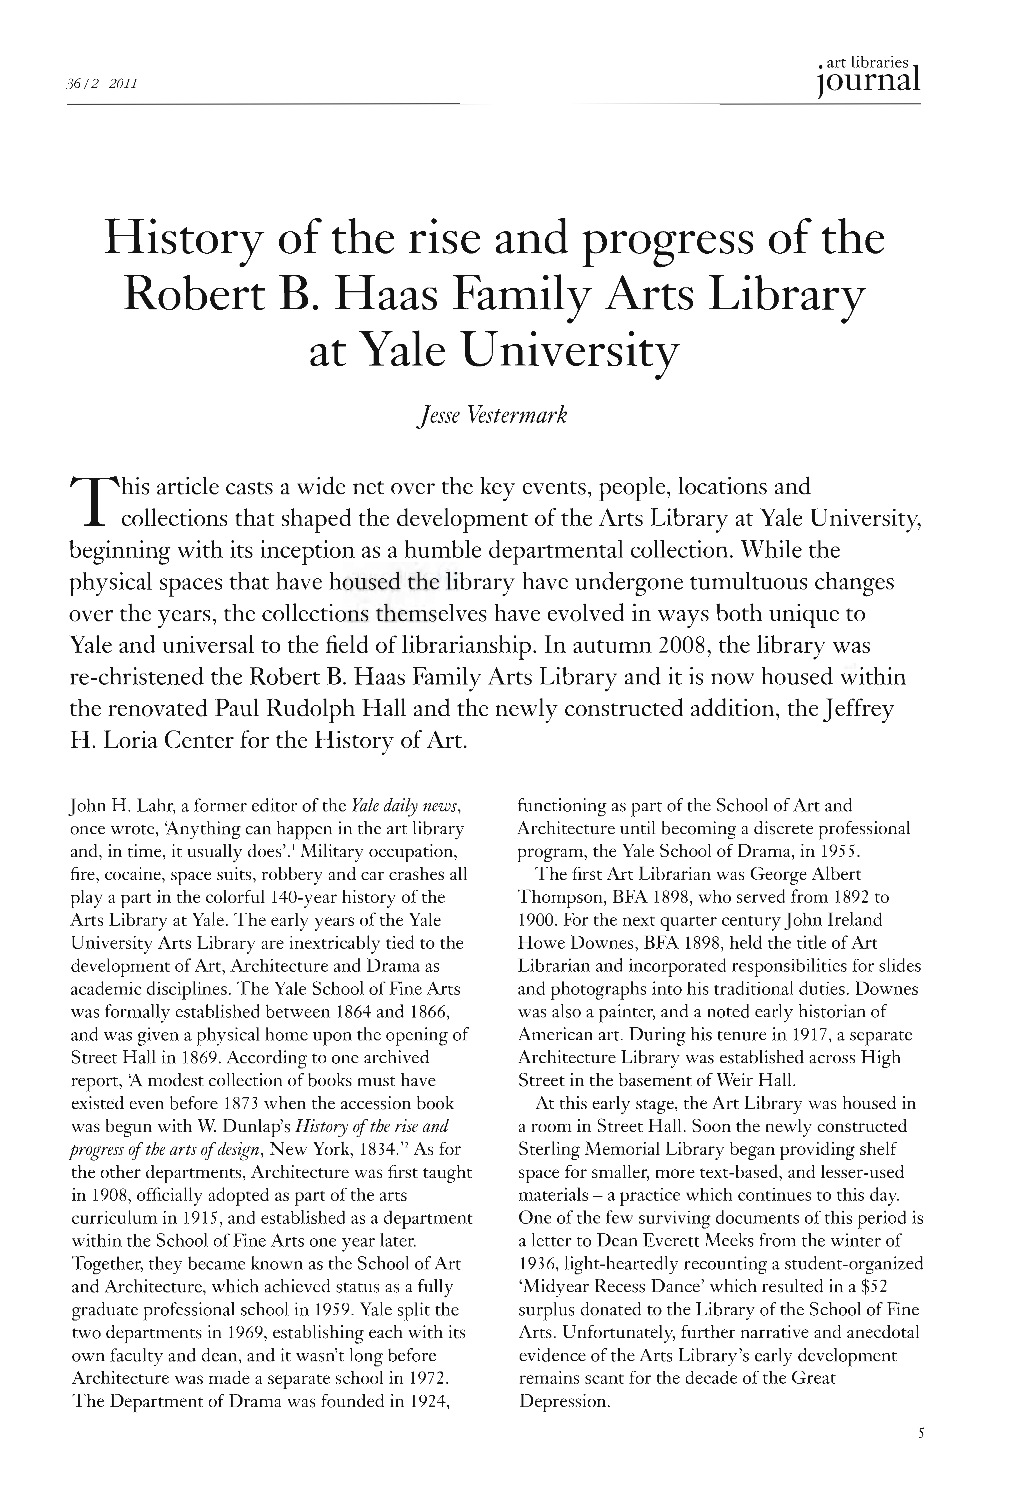 History of the Rise and Progress of the Robert B. Haas Family Arts Library at Yale University